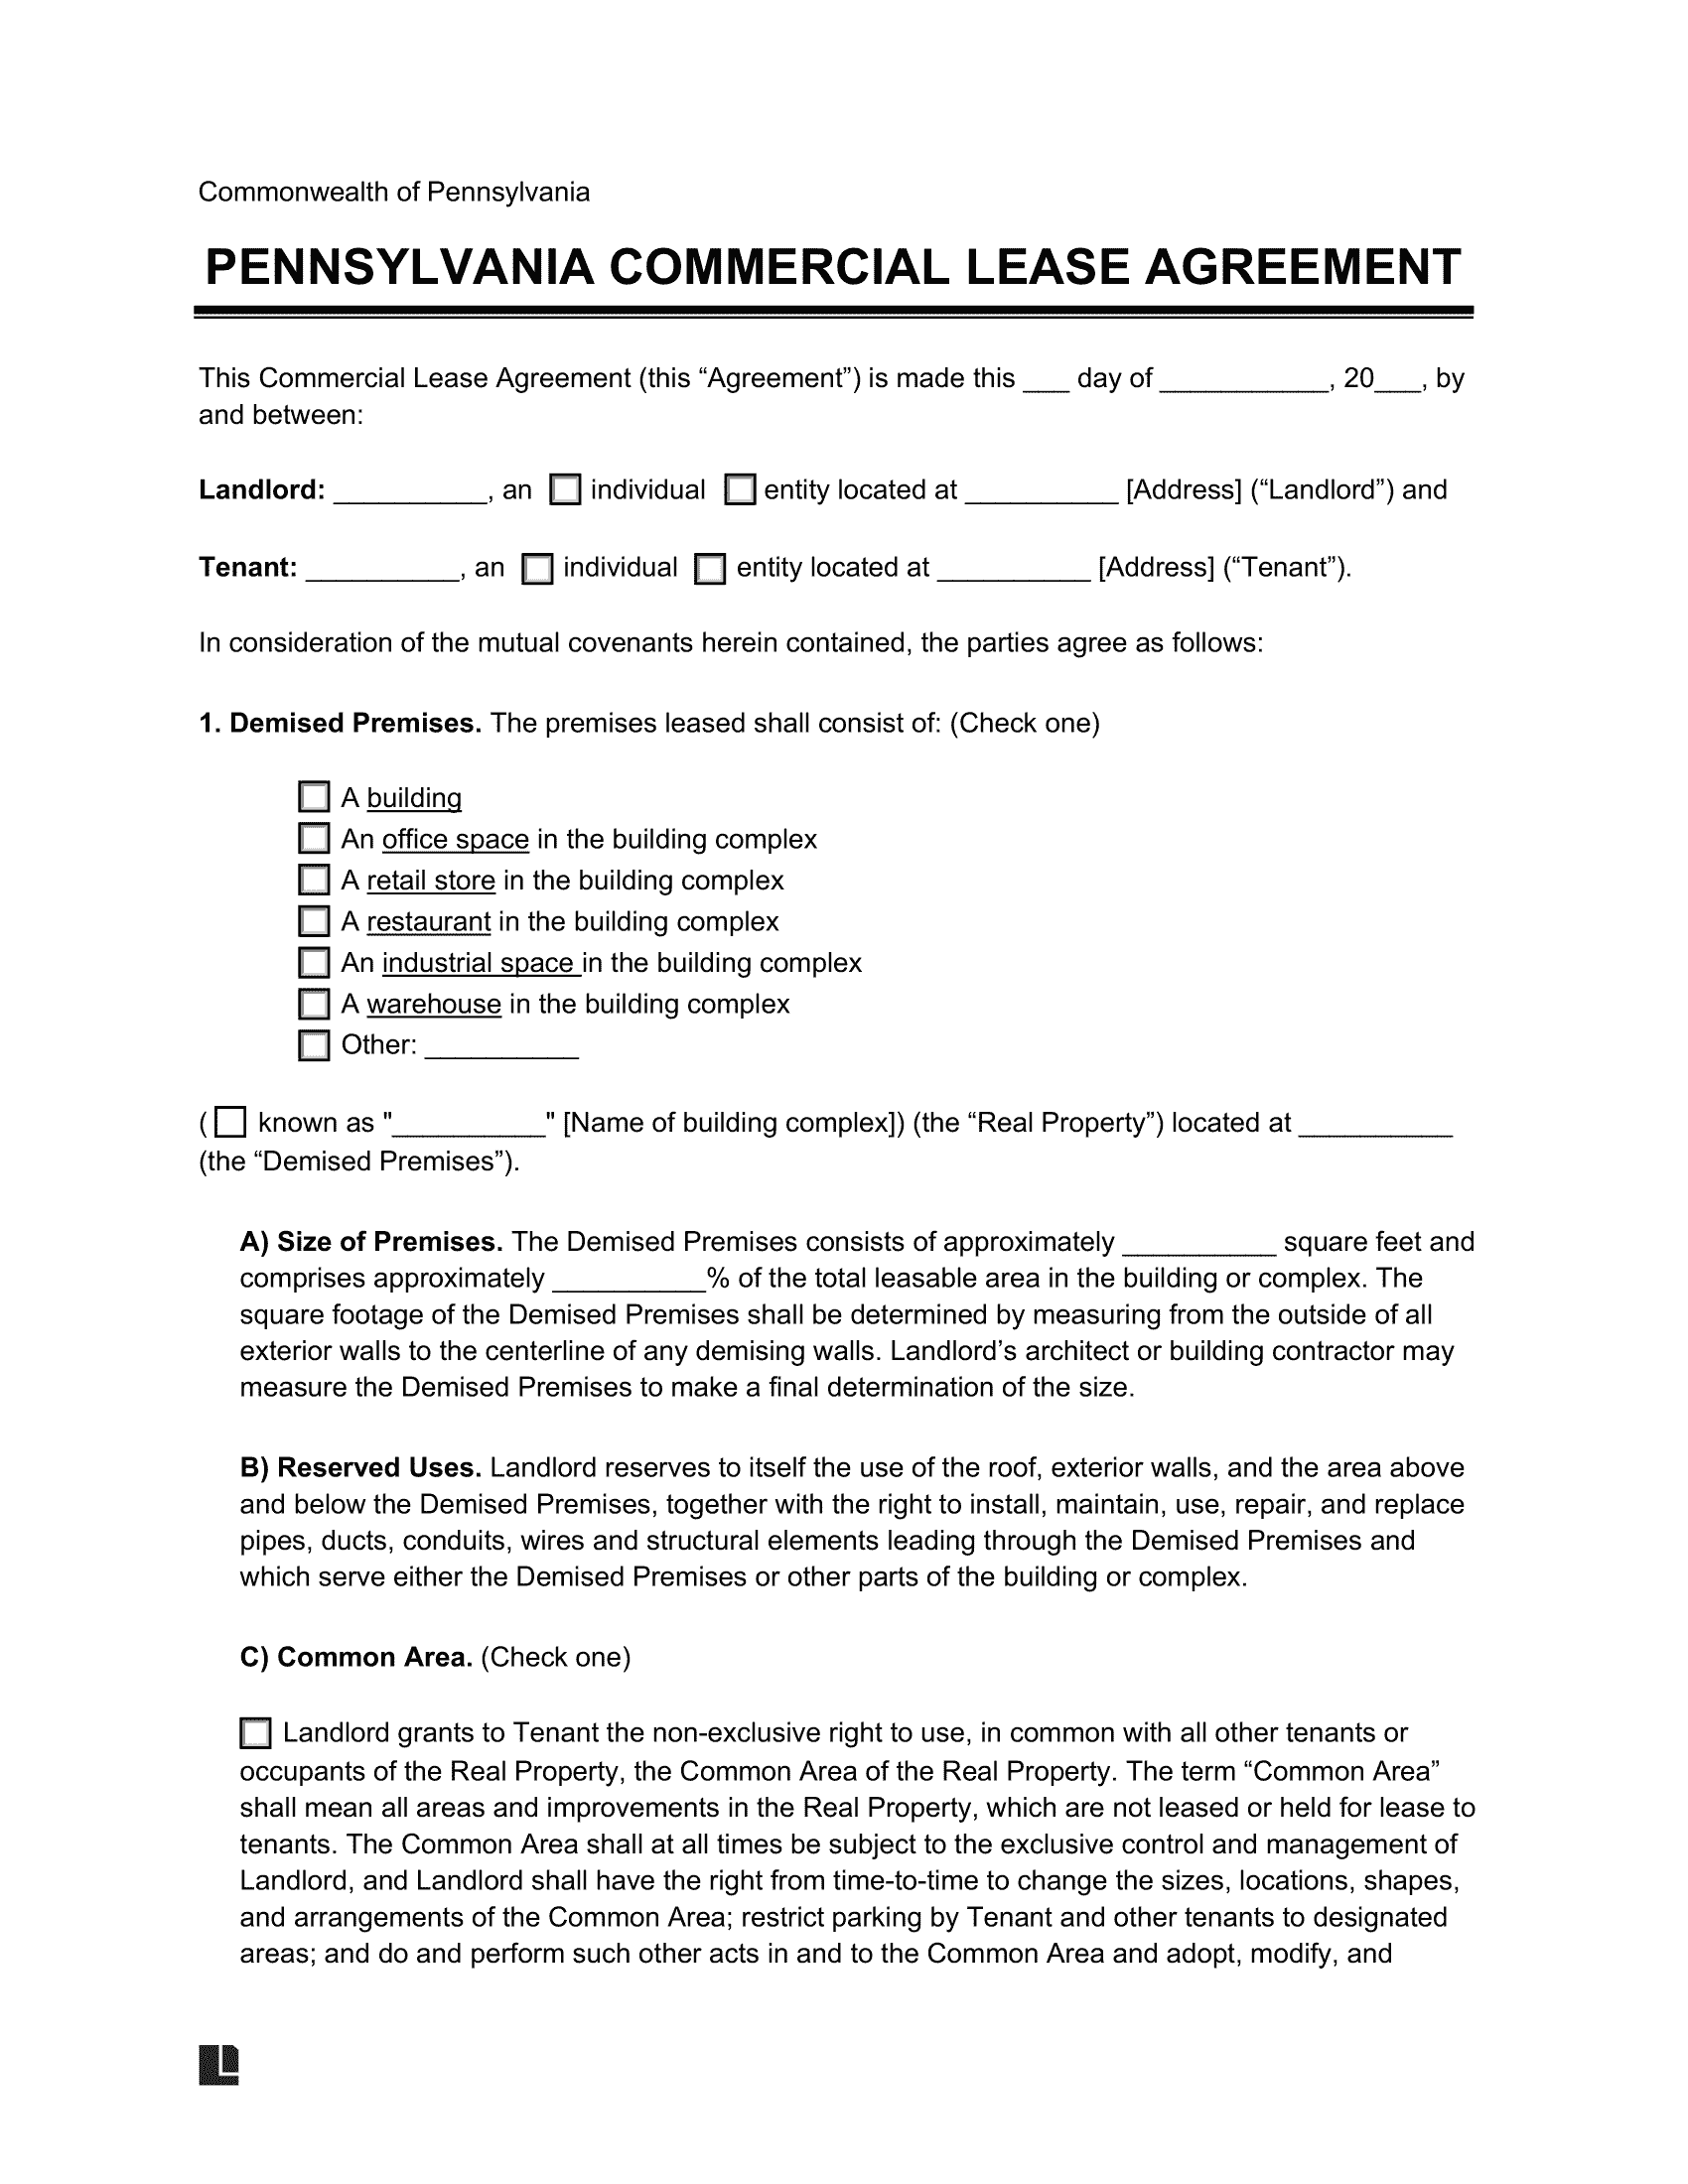 Pennsylvania Commercial Lease Agreement